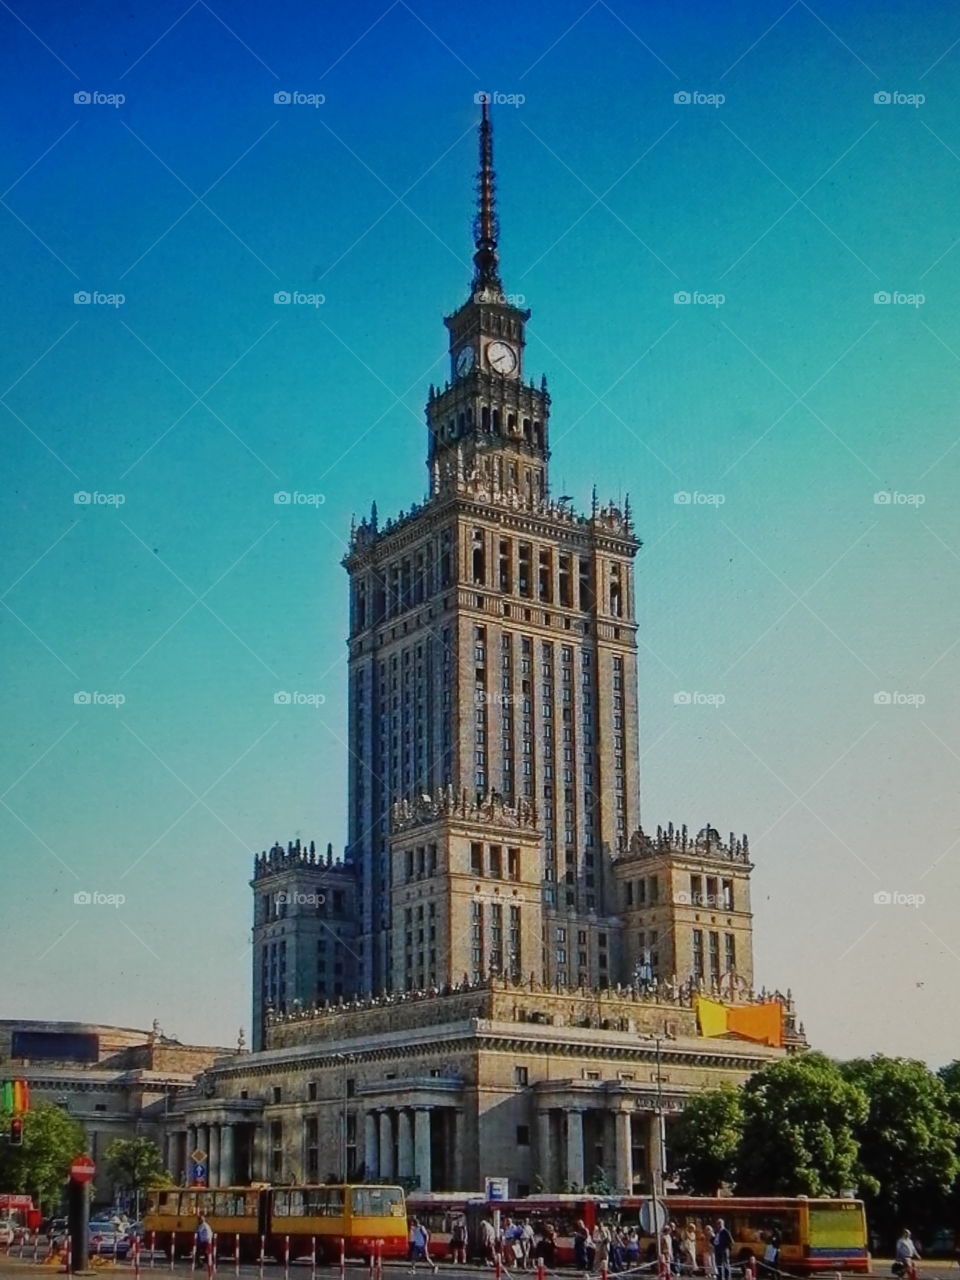 Palace of culture and science at Warsaw, Poland